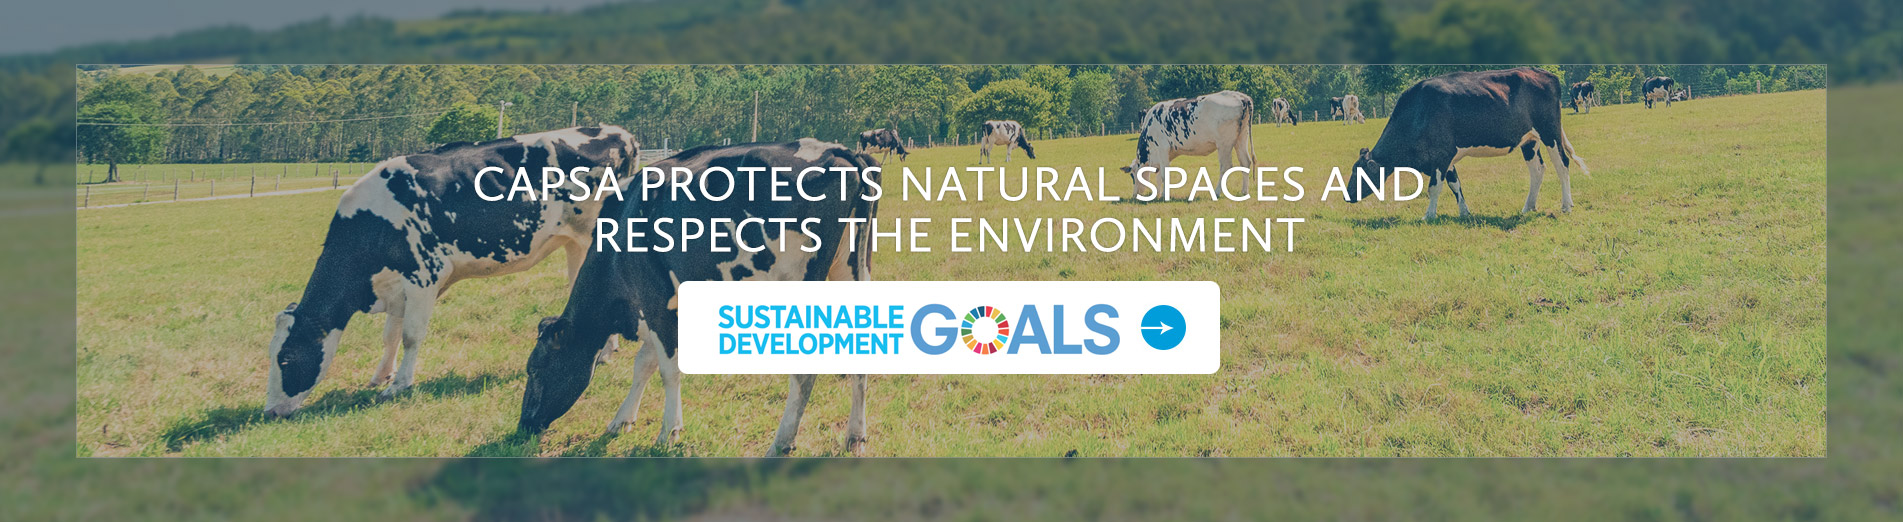 Capsa protects natural spaces and respects the environment